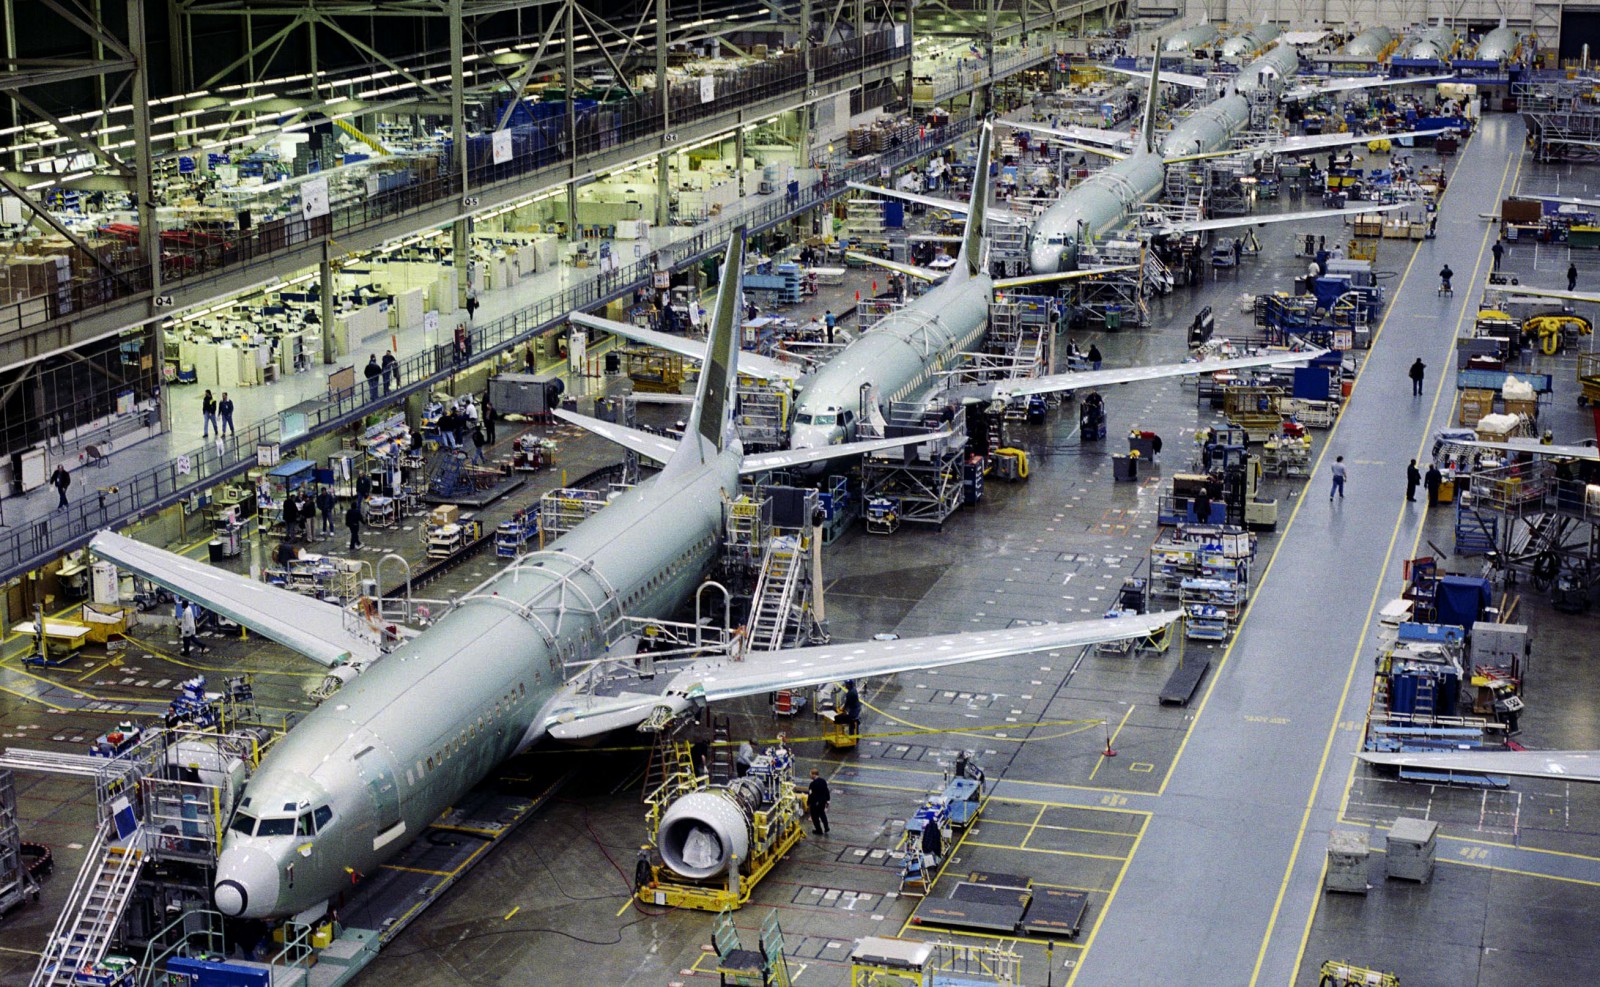 Boeing 737s being built 